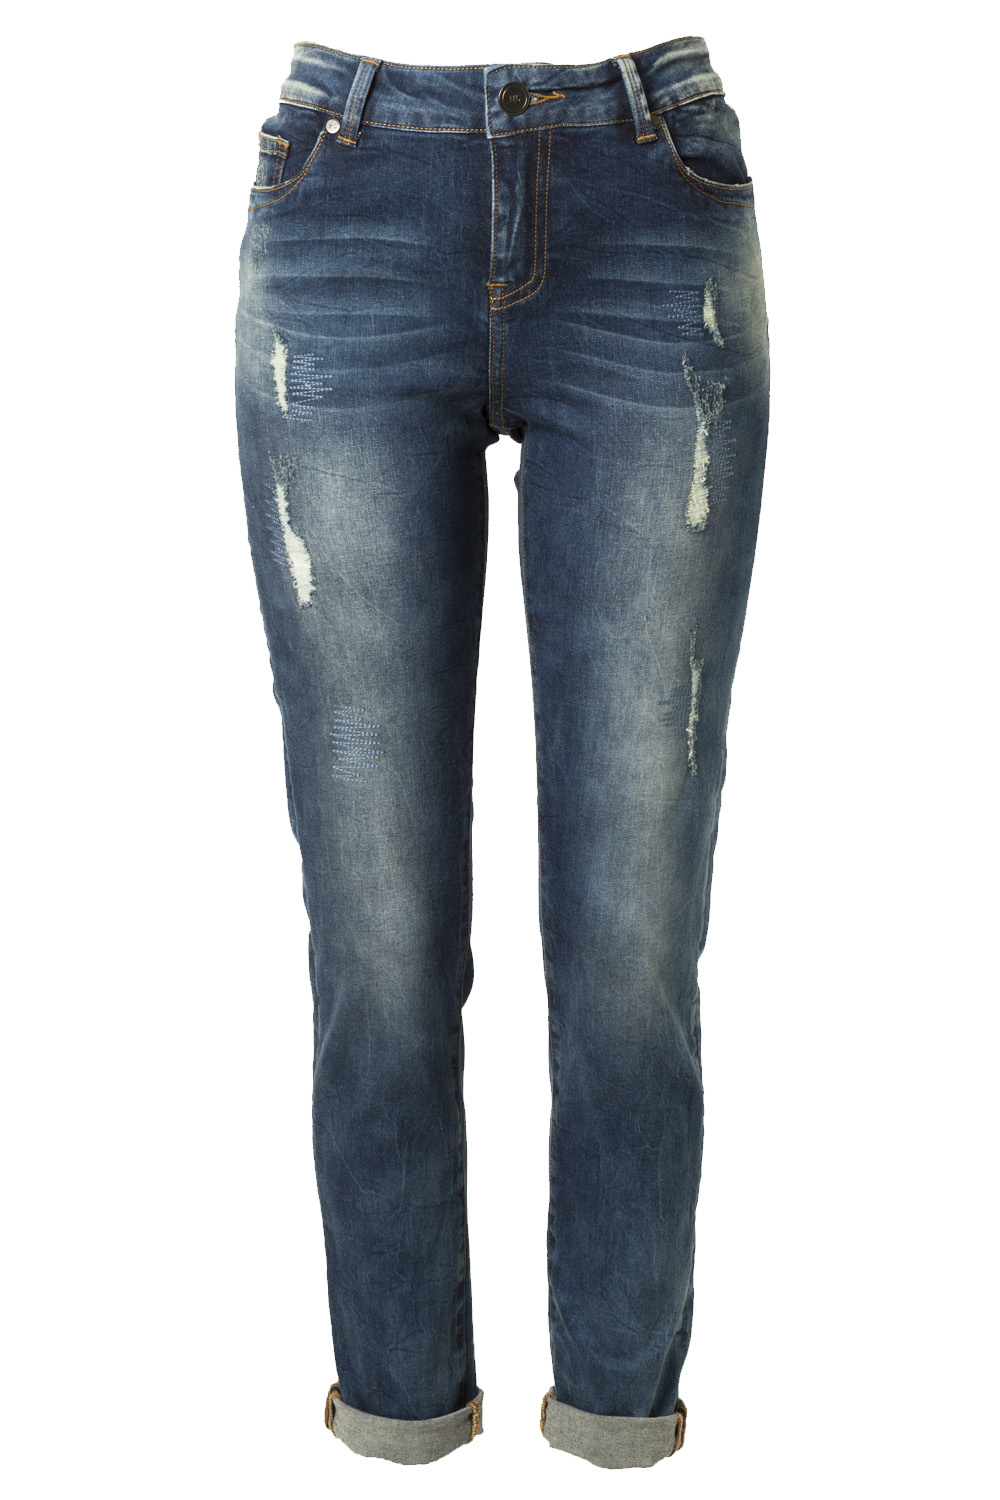 Jeans, $240, by New London.